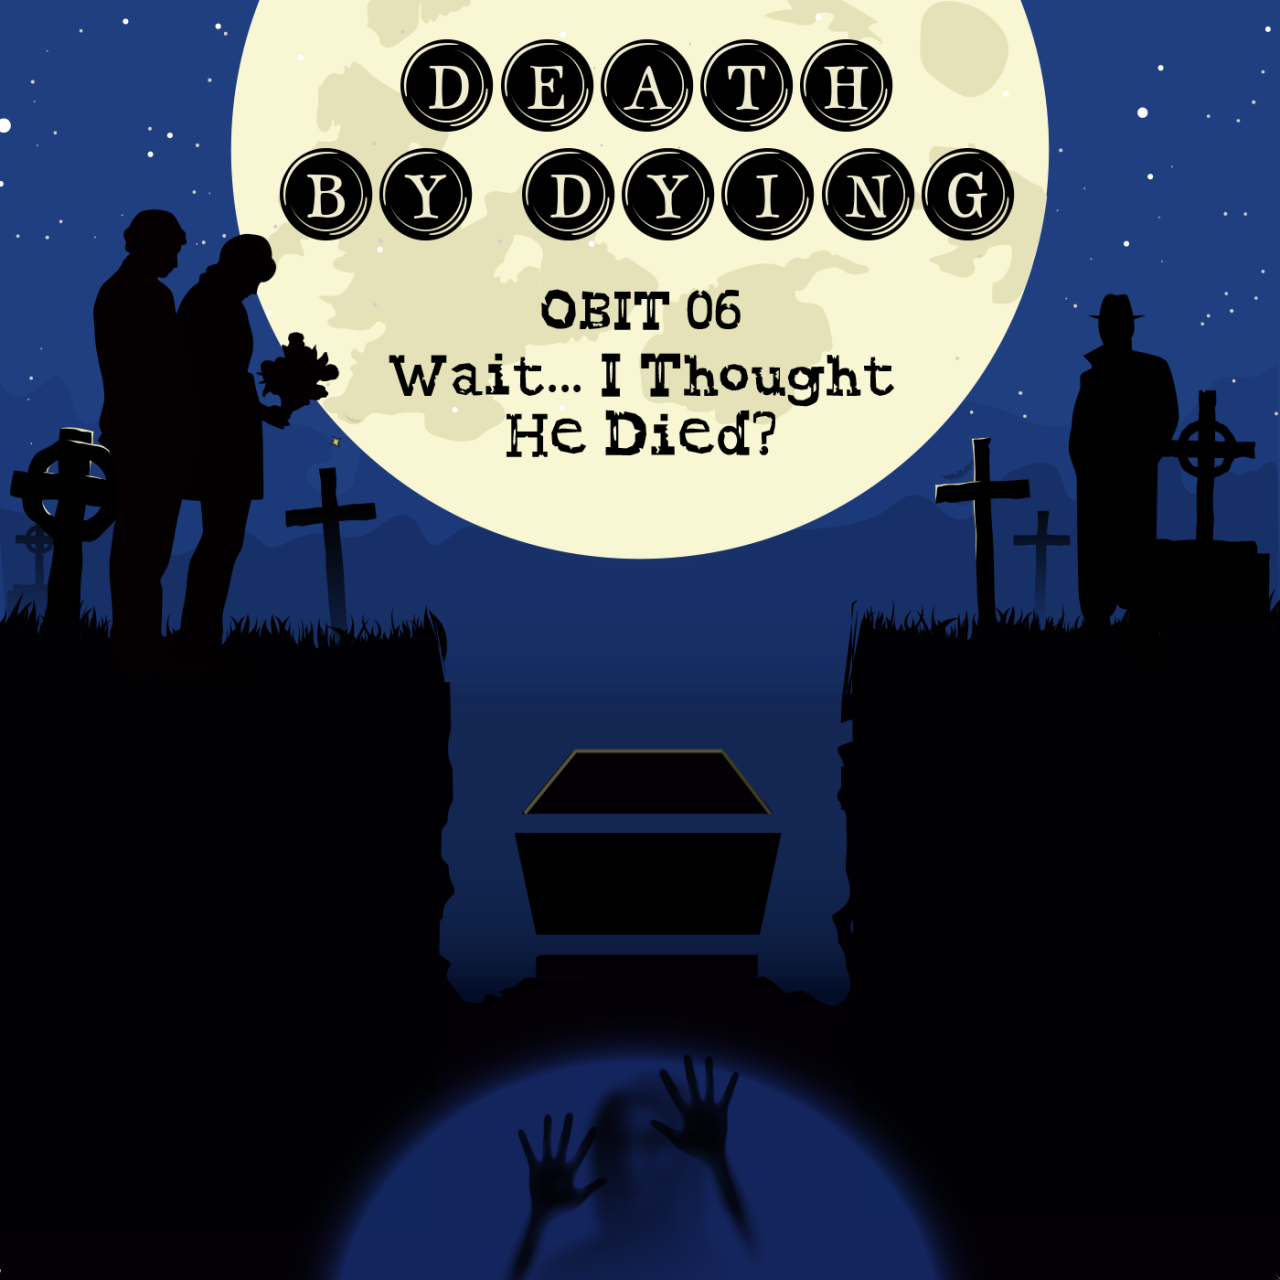 Cover art for the season premiere of Death by Dying Season 2. The Death by Dying logo and the episode title “Obit 6: Wait… I Thought He Died” hang over the backdrop of a full moon. Below, the silhouettes of three people stand around a coffin at a funeral. Beneath the coffin, a ghostly figure reaches out for help from an underground tunnel.